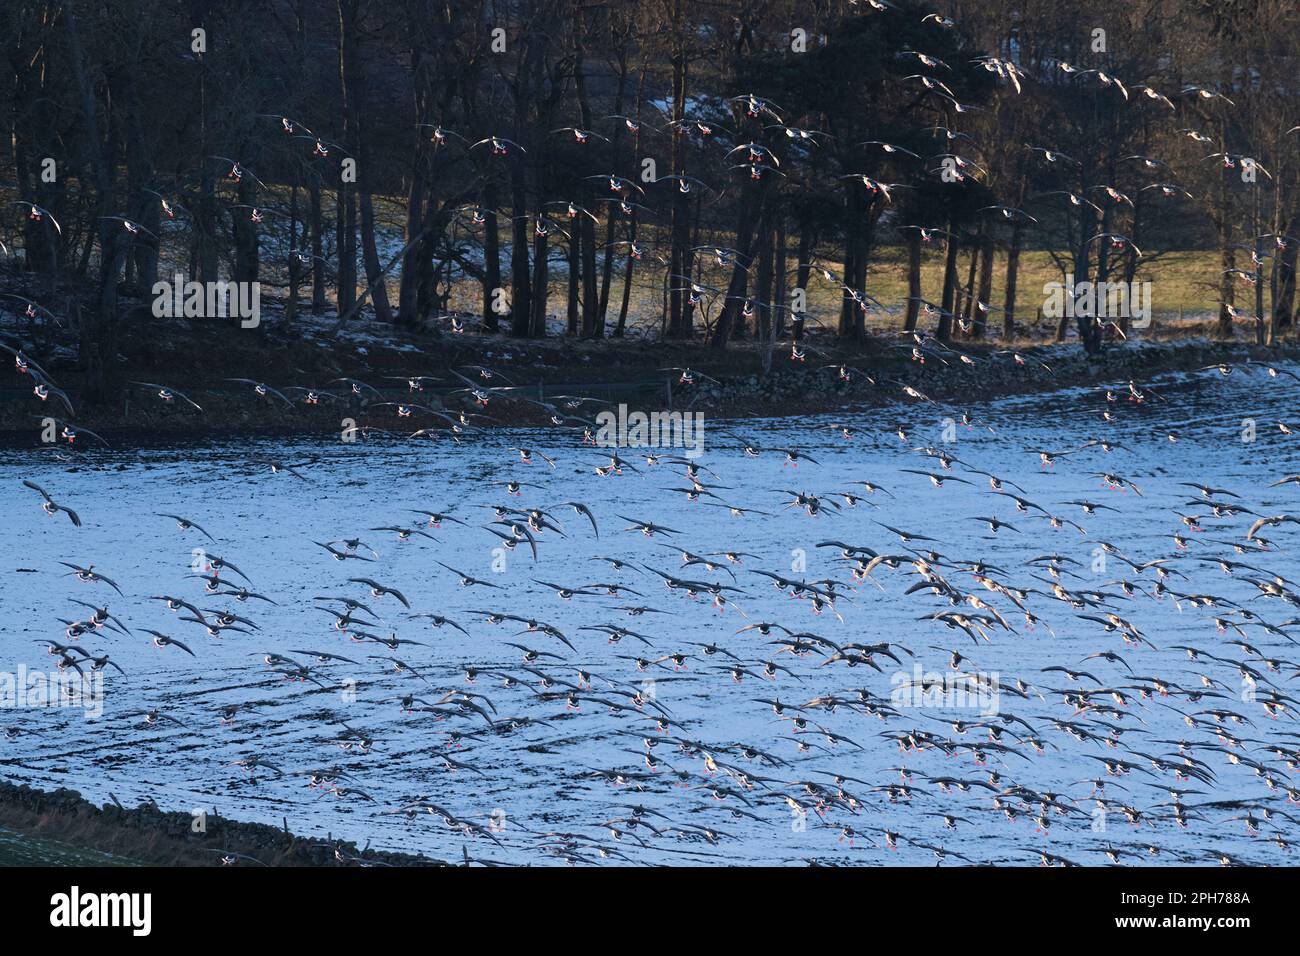 A Large Flock of Pink-footed Geese (Anser Brachyrhynchus) Landing on a Snow-covered Ploughed Field With Their Pink Feet Illuminated in the Sunlight Stock Photo